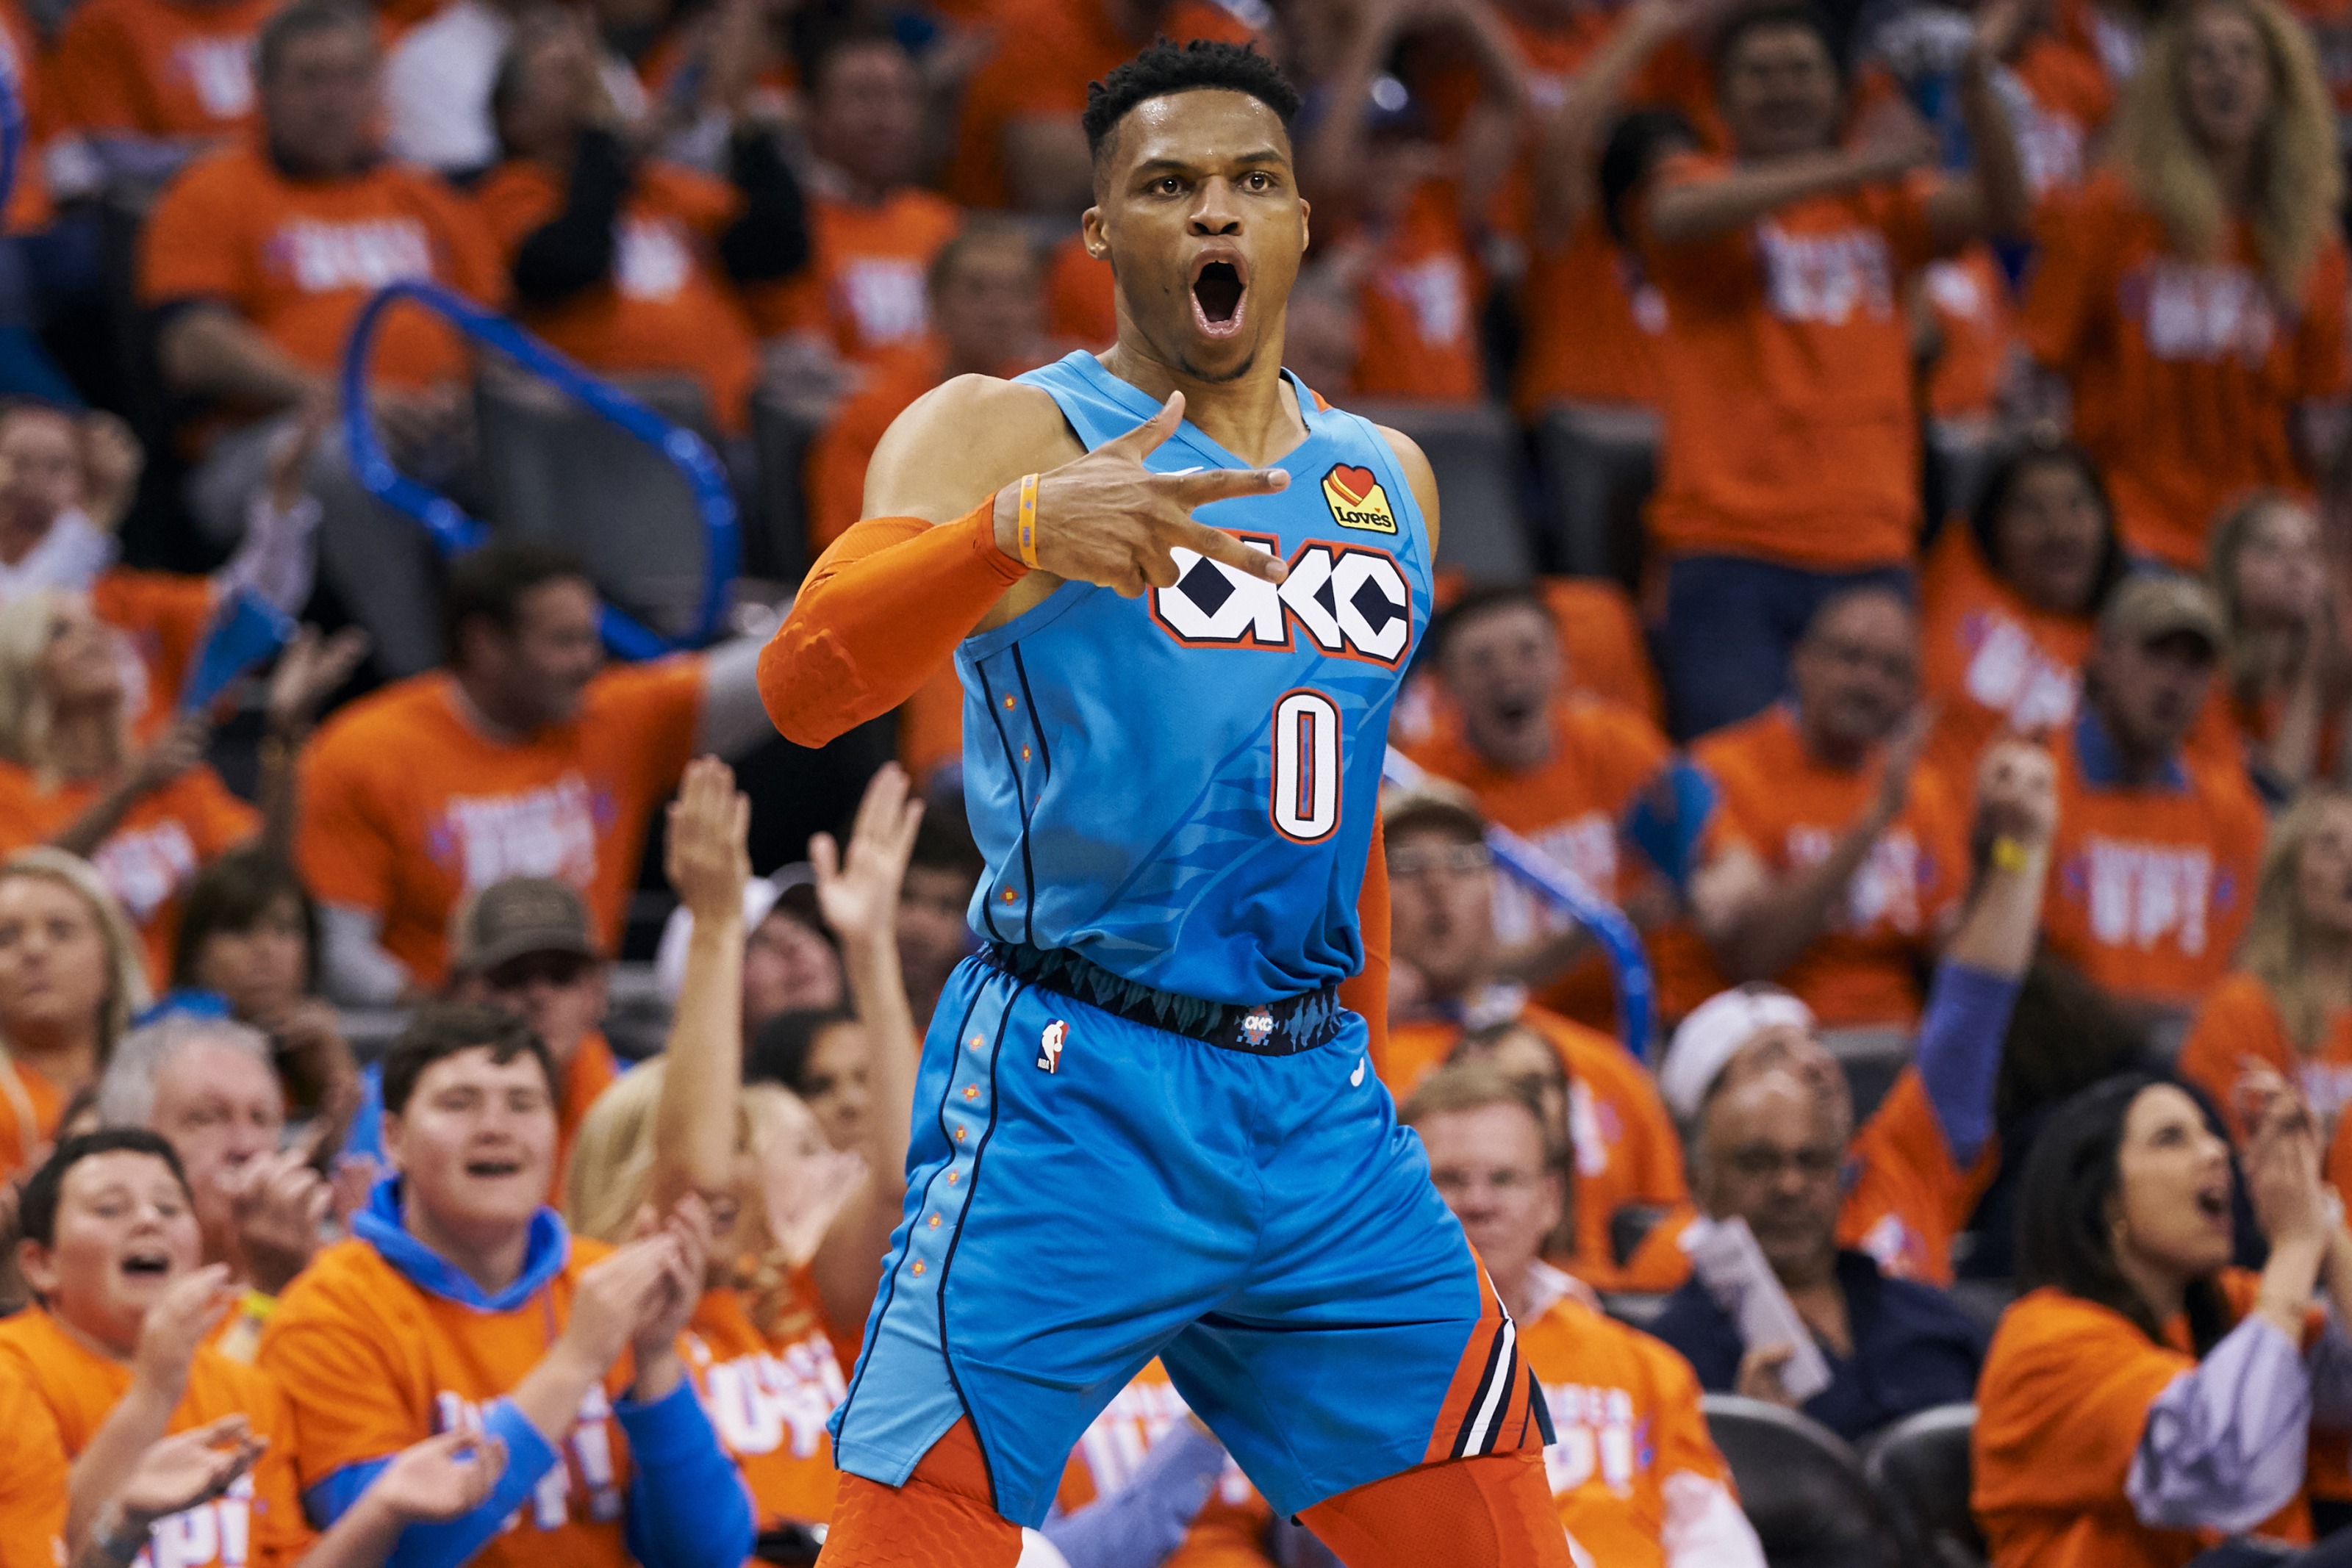 Russell Westbrook gets into heated altercation with Bucks' fan